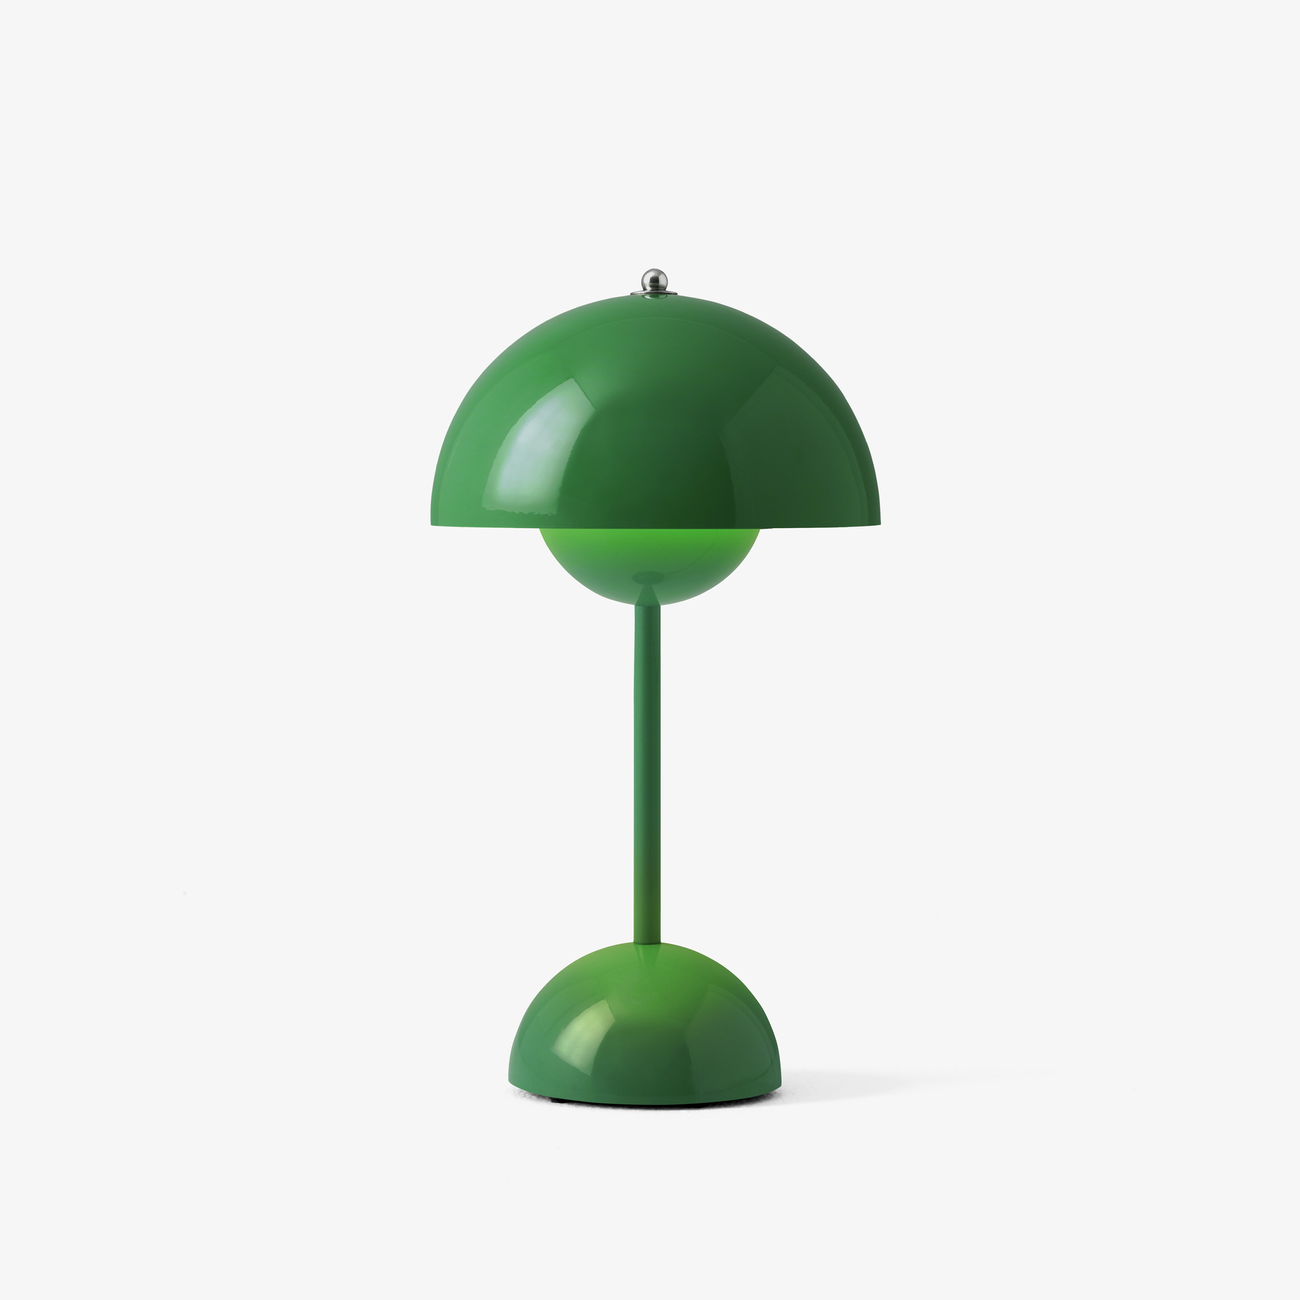 &Tradition - Flowerpot VP9 Portable Lamp - Signal Green - Space Camp